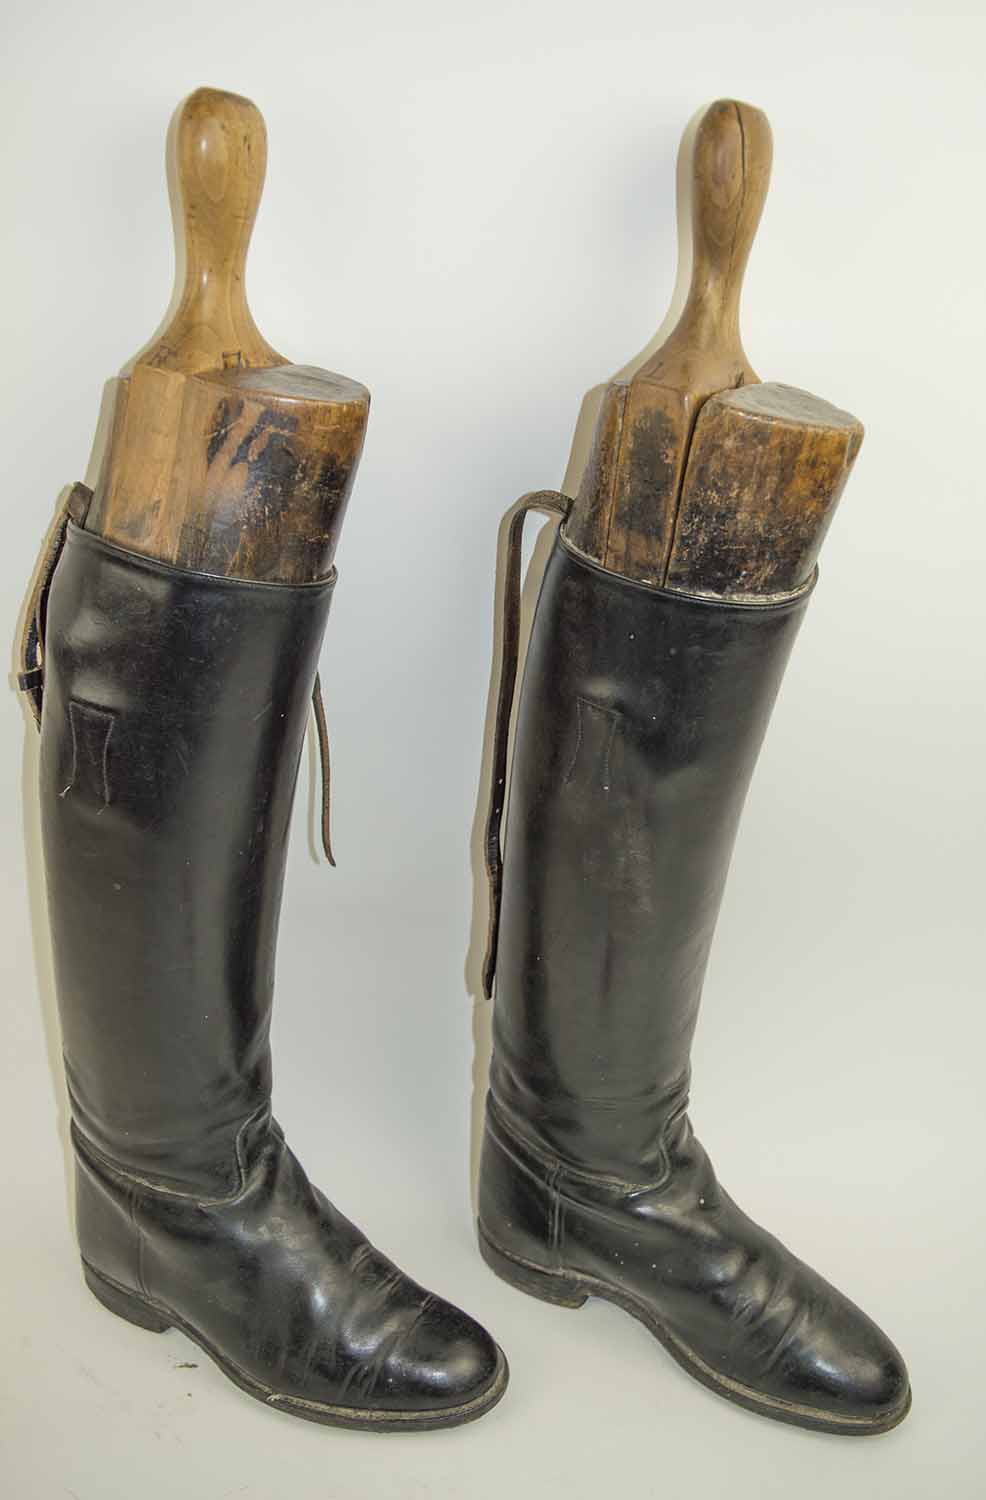 A PAIR OF ANTIQUE WOOD BOOT JACKS. (2)